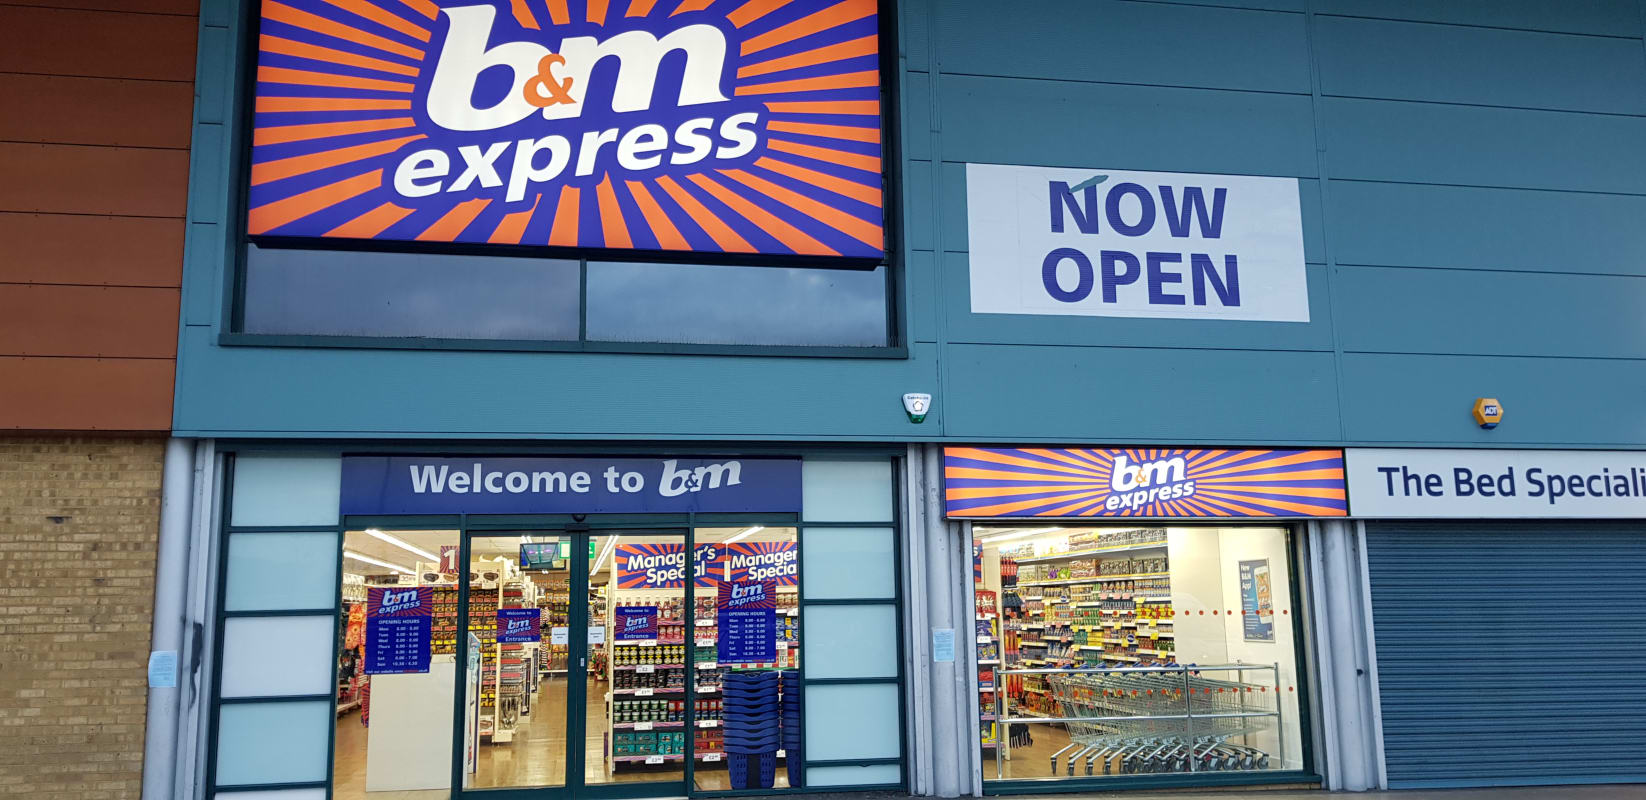 B&M's newest store opened in Speke on Saturday (20th October 2018). The store is located at The Speke Centre (opposite the Jaguar Land Rover factory).